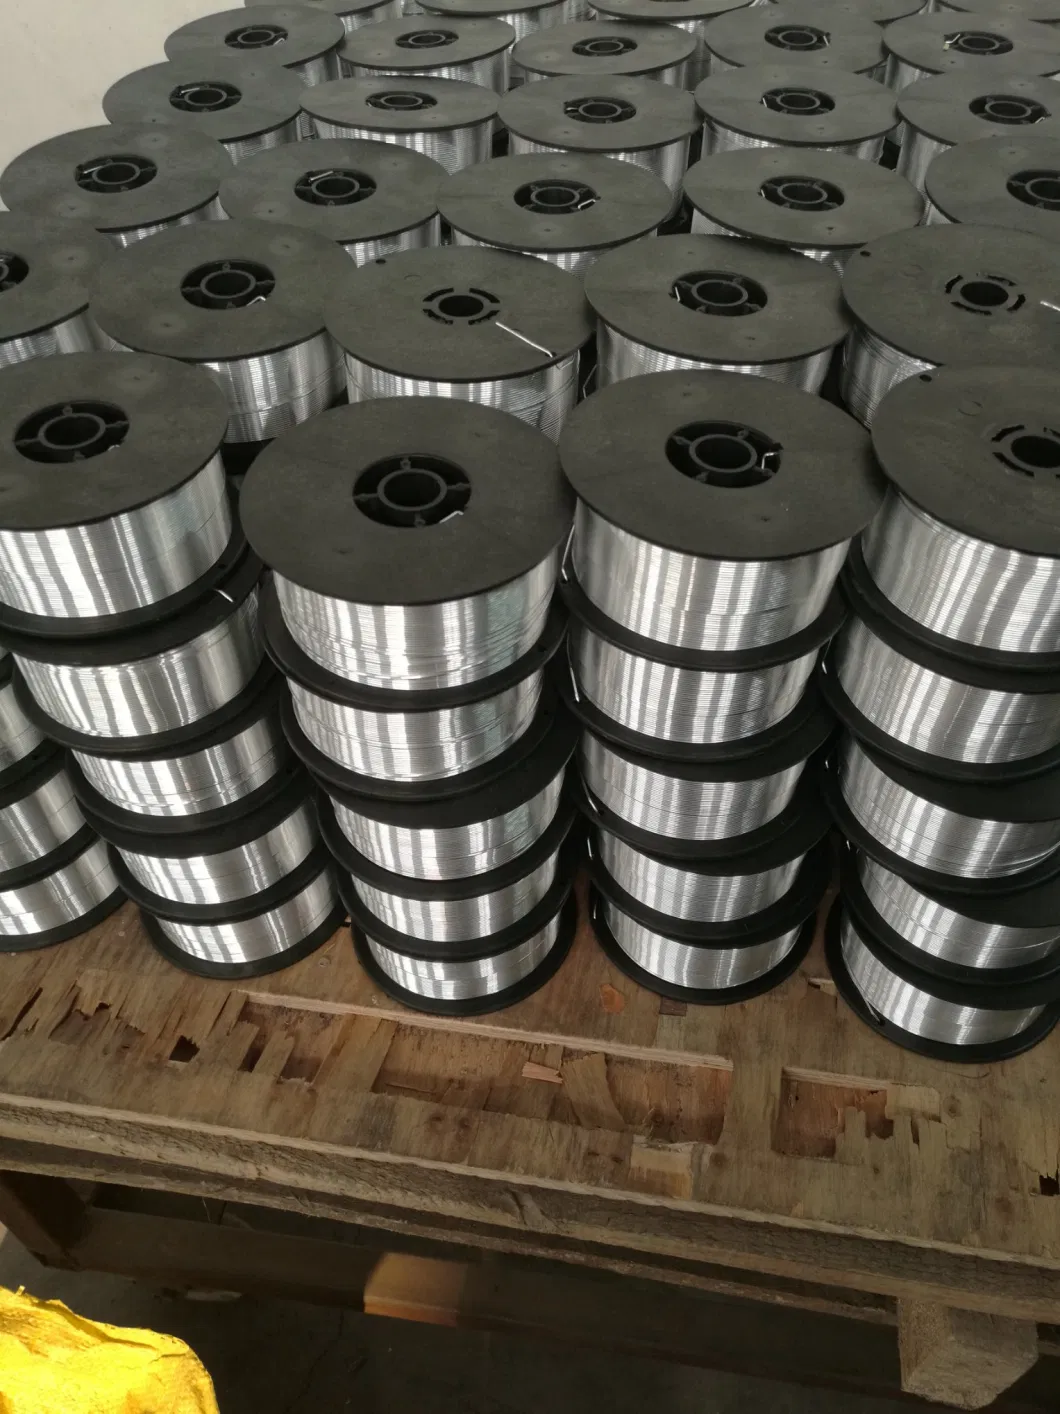 Wholesale Welding Material Wire/Stainless Steel Welding Electrode 316L Flux Core